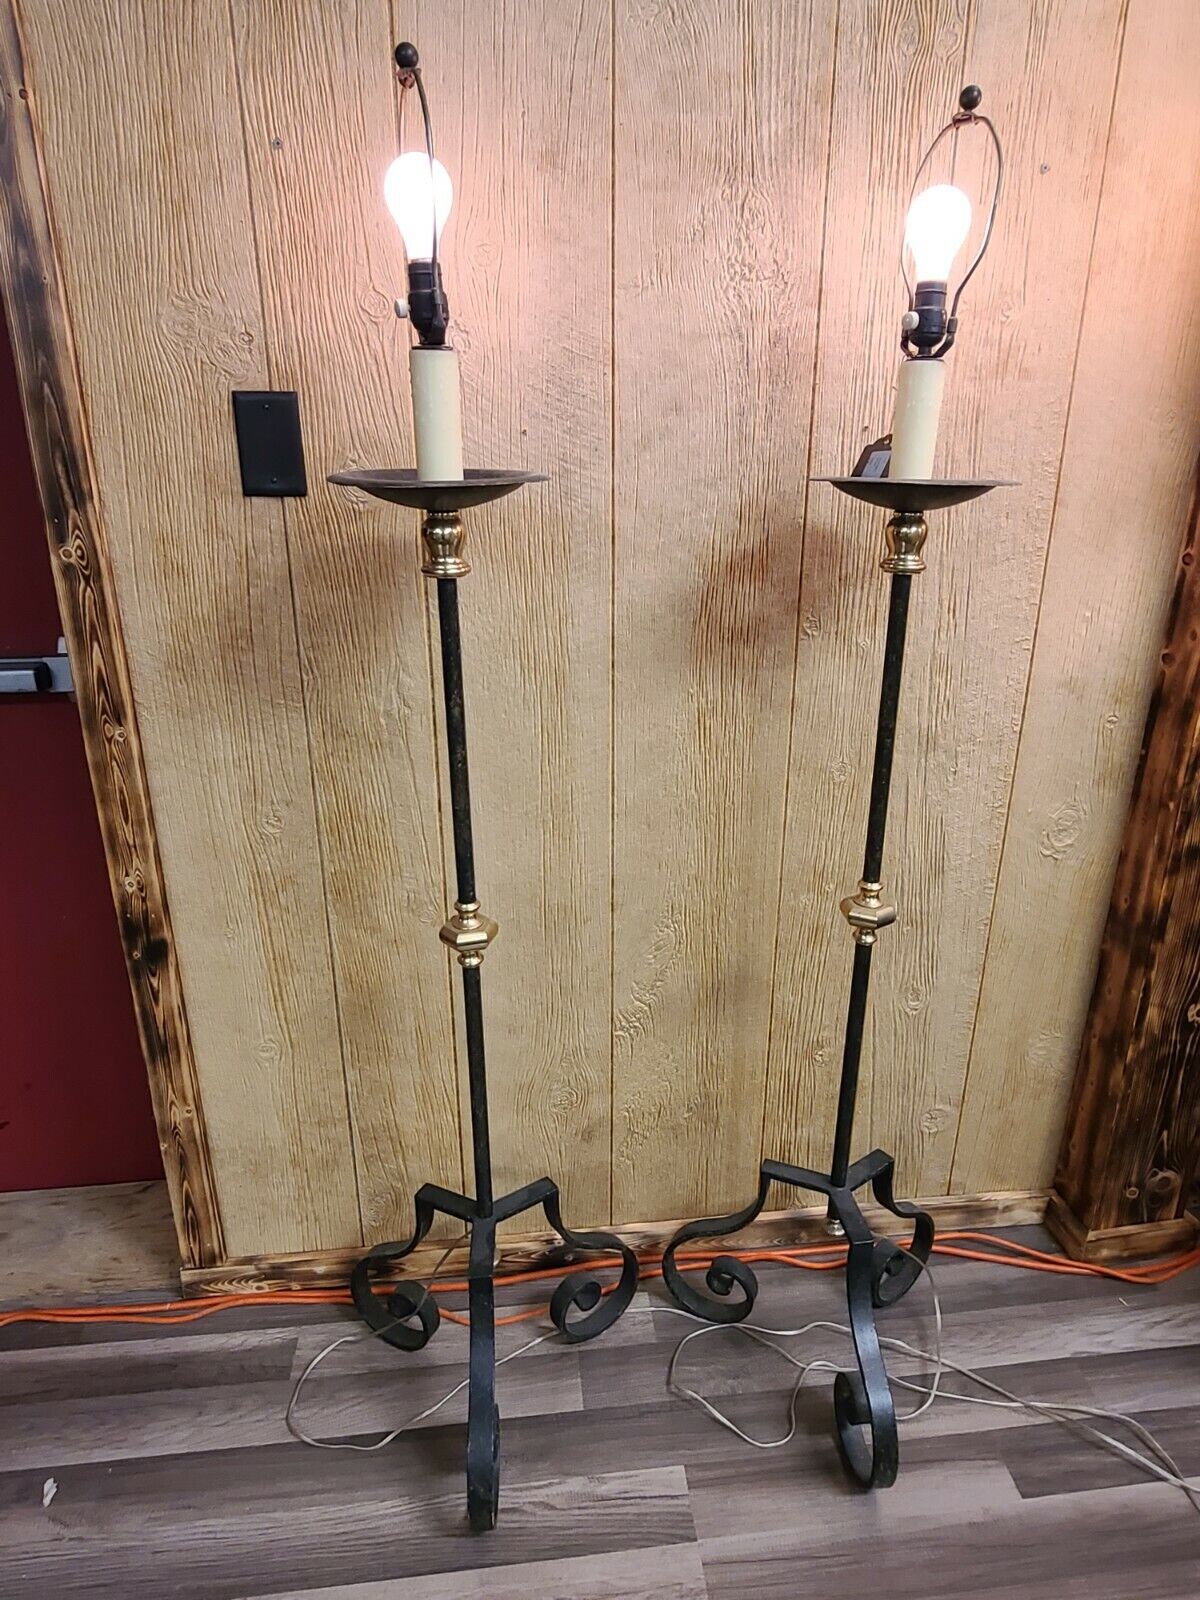 Wrought Iron Metal Pair of Mid Century Floor Lamps 3 Legs Dimmer Switches